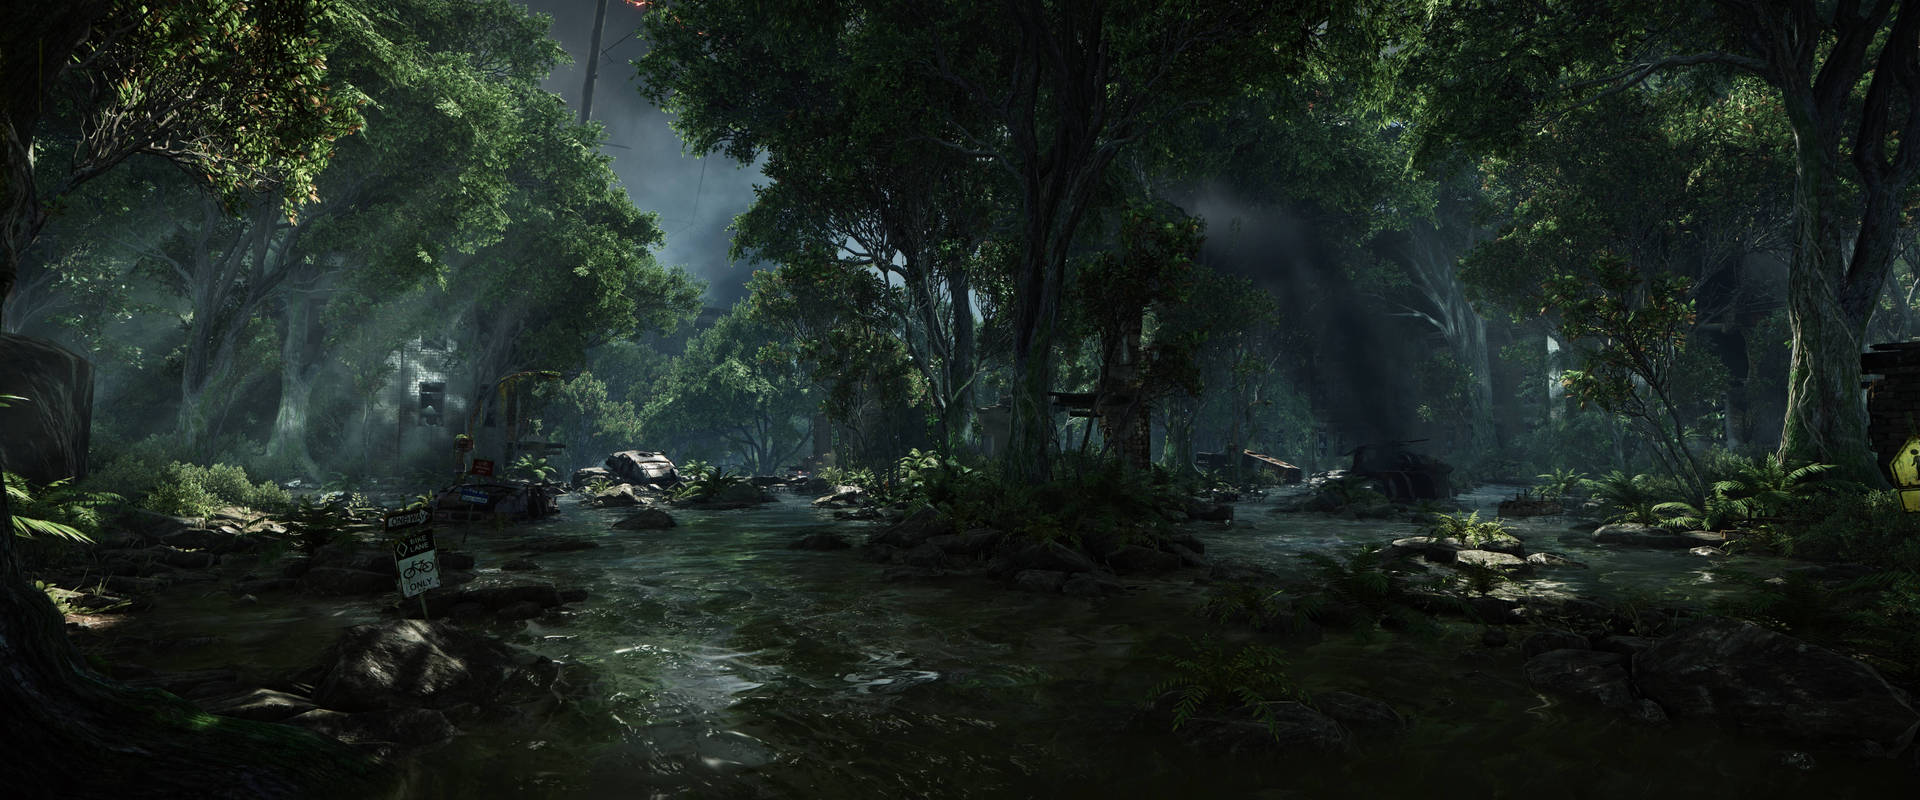 Dual Monitor Crysis Forest Wallpaper